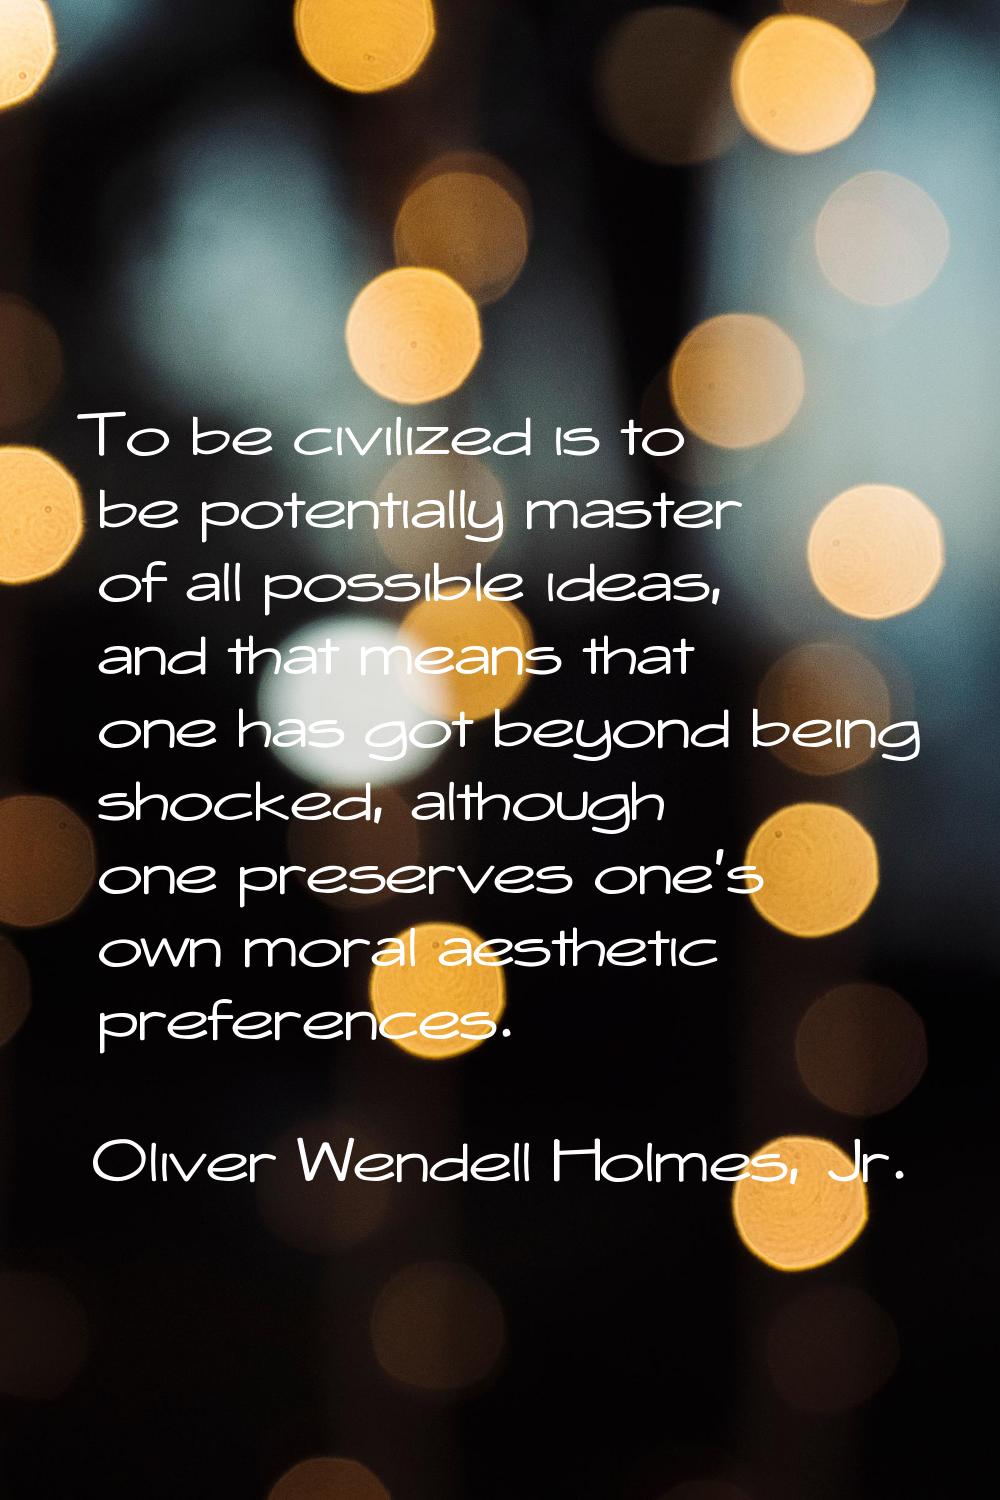 To be civilized is to be potentially master of all possible ideas, and that means that one has got 